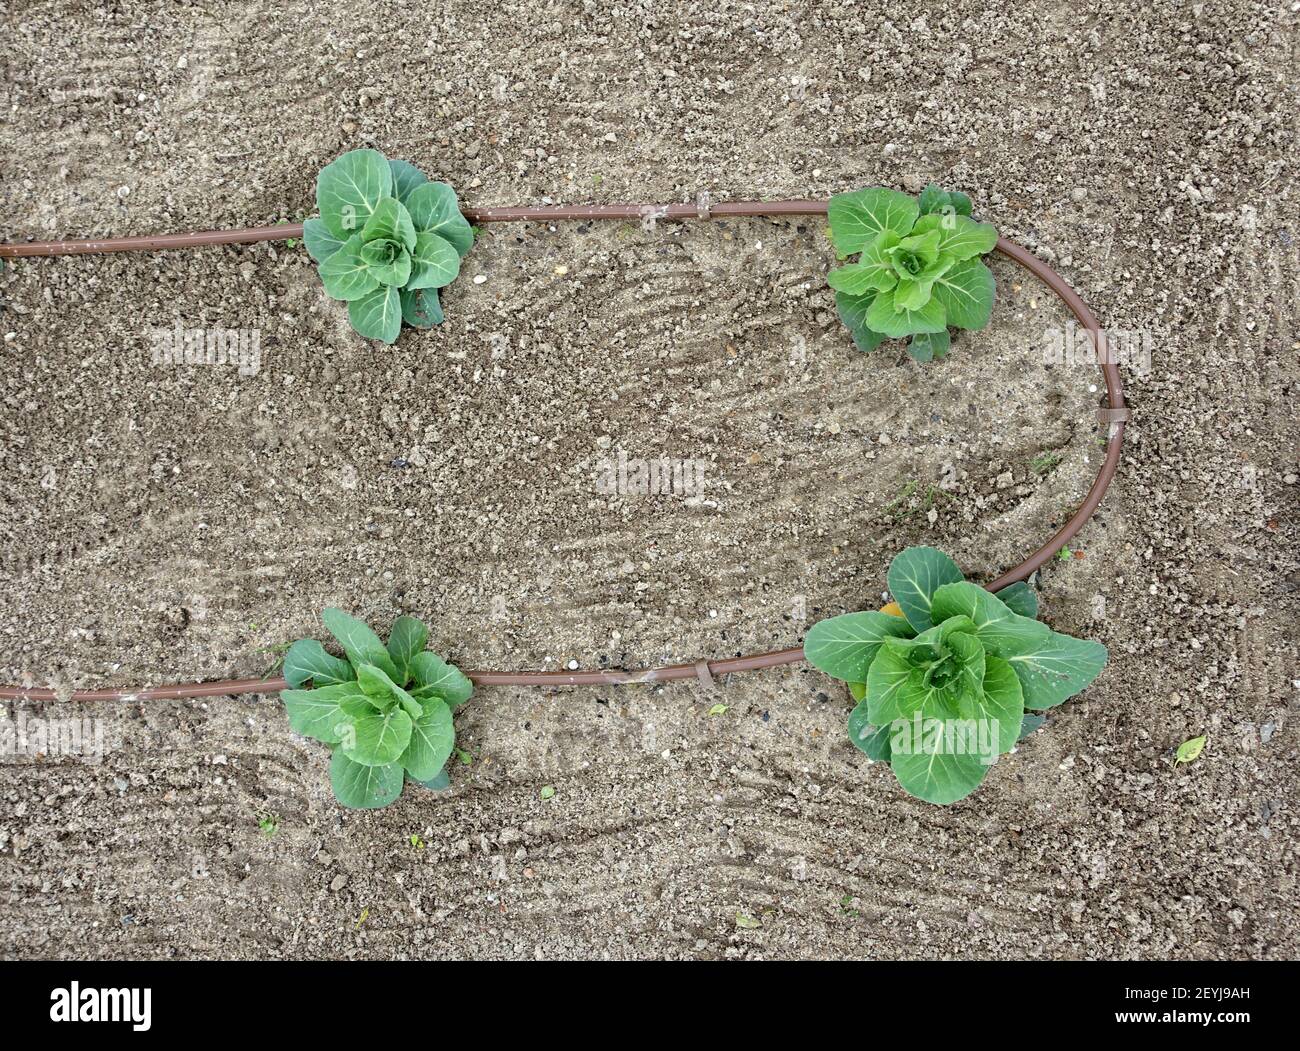 Top view of baby cabbage plants growing in soil Stock Photo